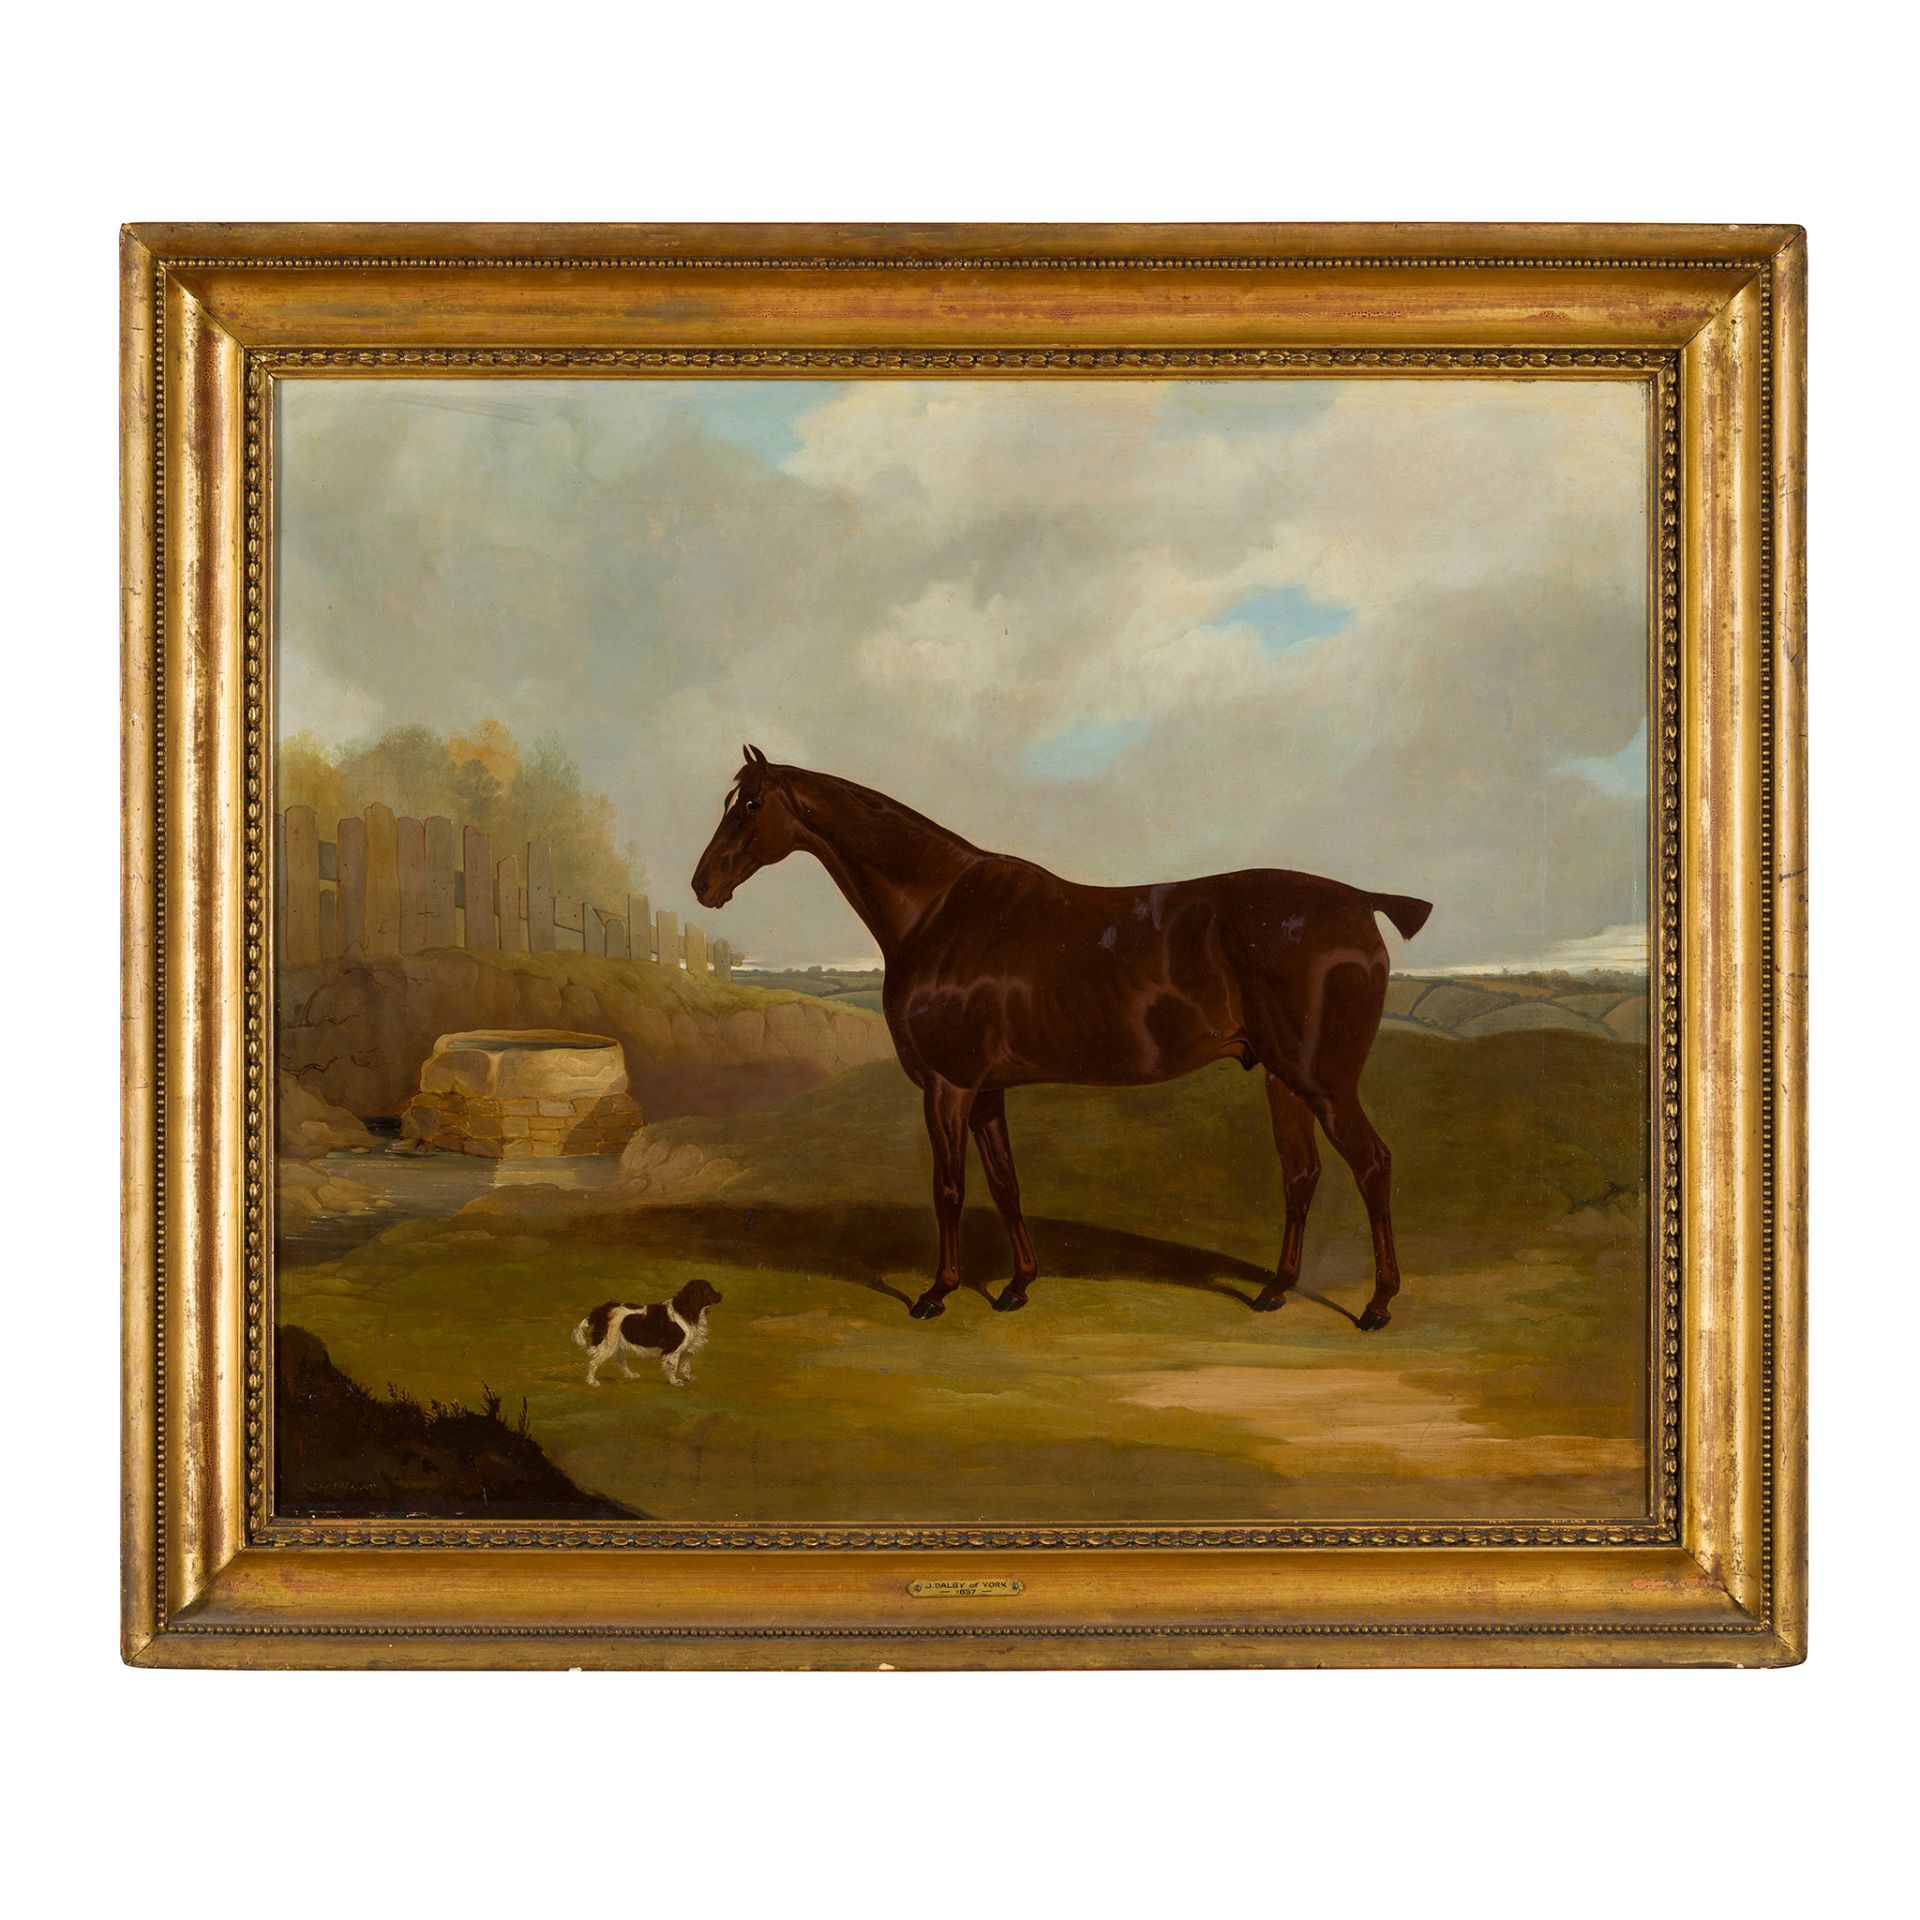 DAVID DALBY OF YORK (BRITISH 1810-1865) A LIVER CHESTNUT HUNTER AND A RED AND WHITE SPANIEL BY A - Image 2 of 2